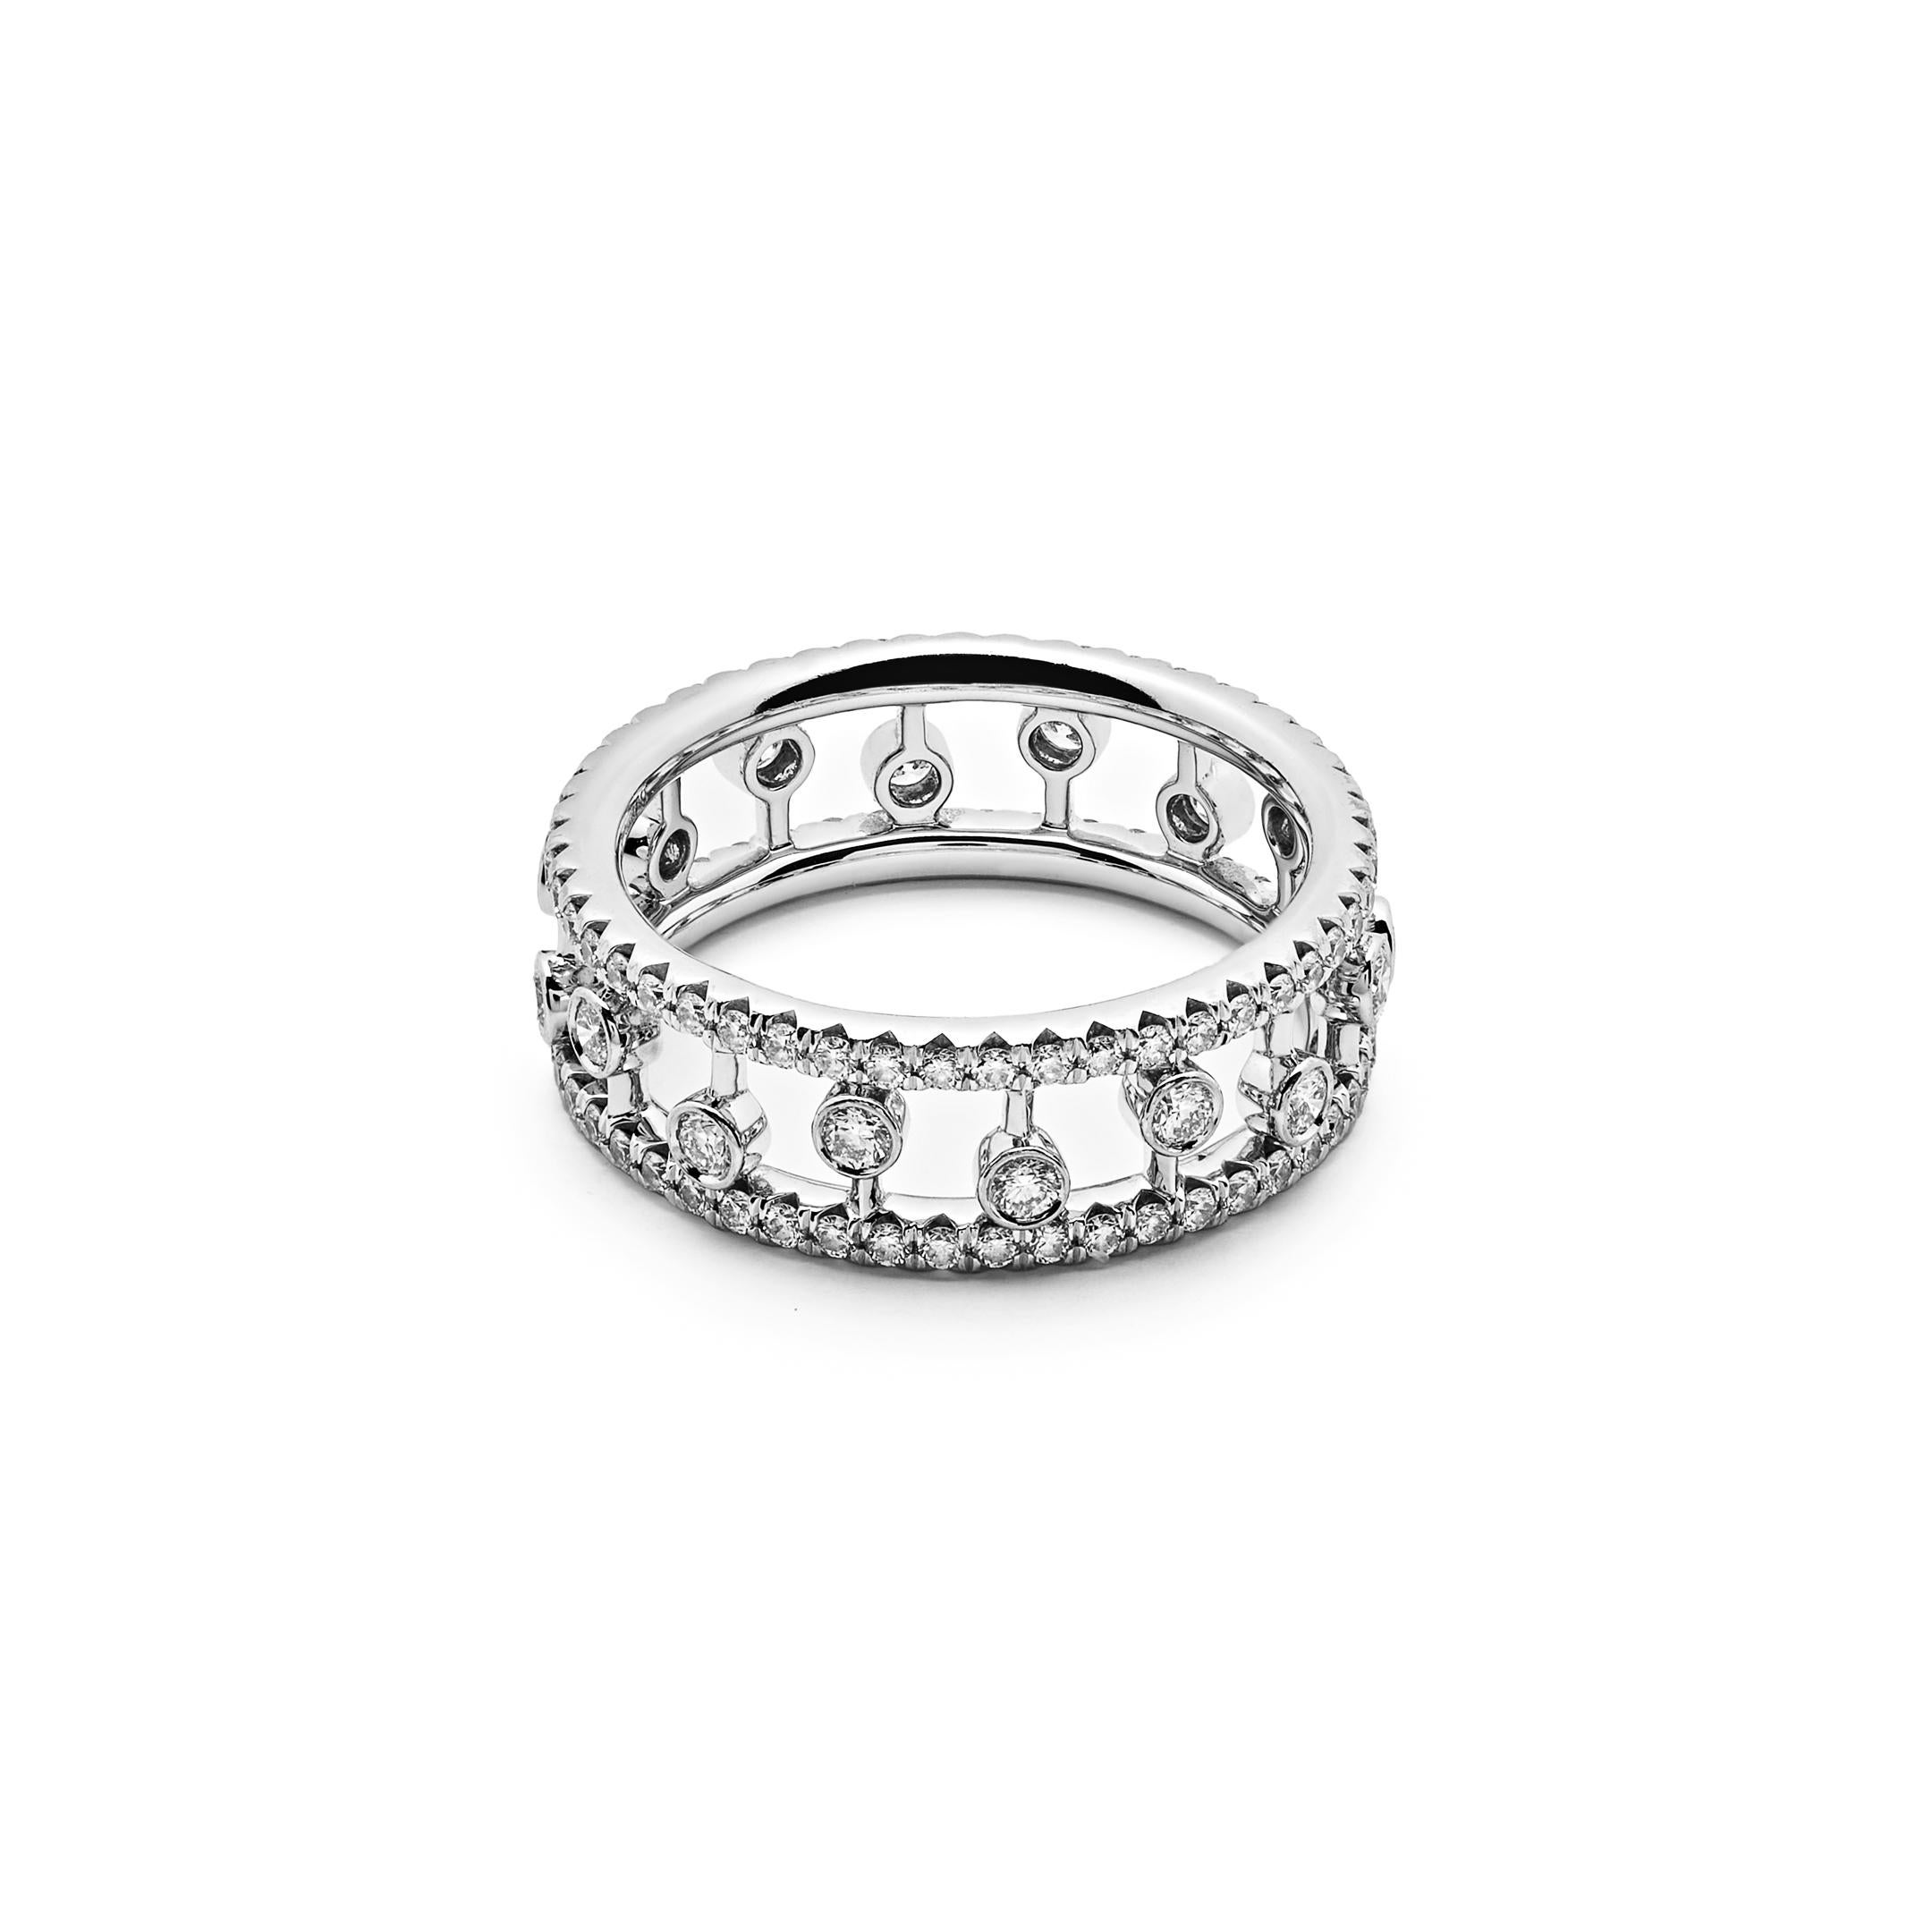 Round Cut De Beers Dewdrop Collection Band in White Gold set with Micropavé Diamonds. For Sale